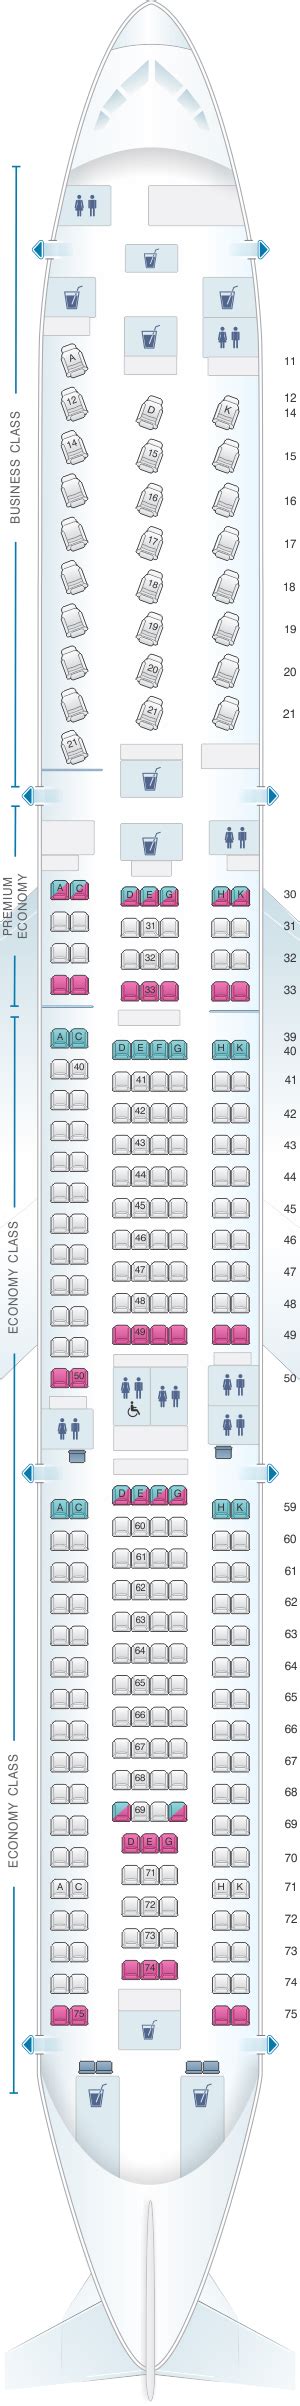 Seat Map Cathay Pacific Airways Airbus A340 300 34j